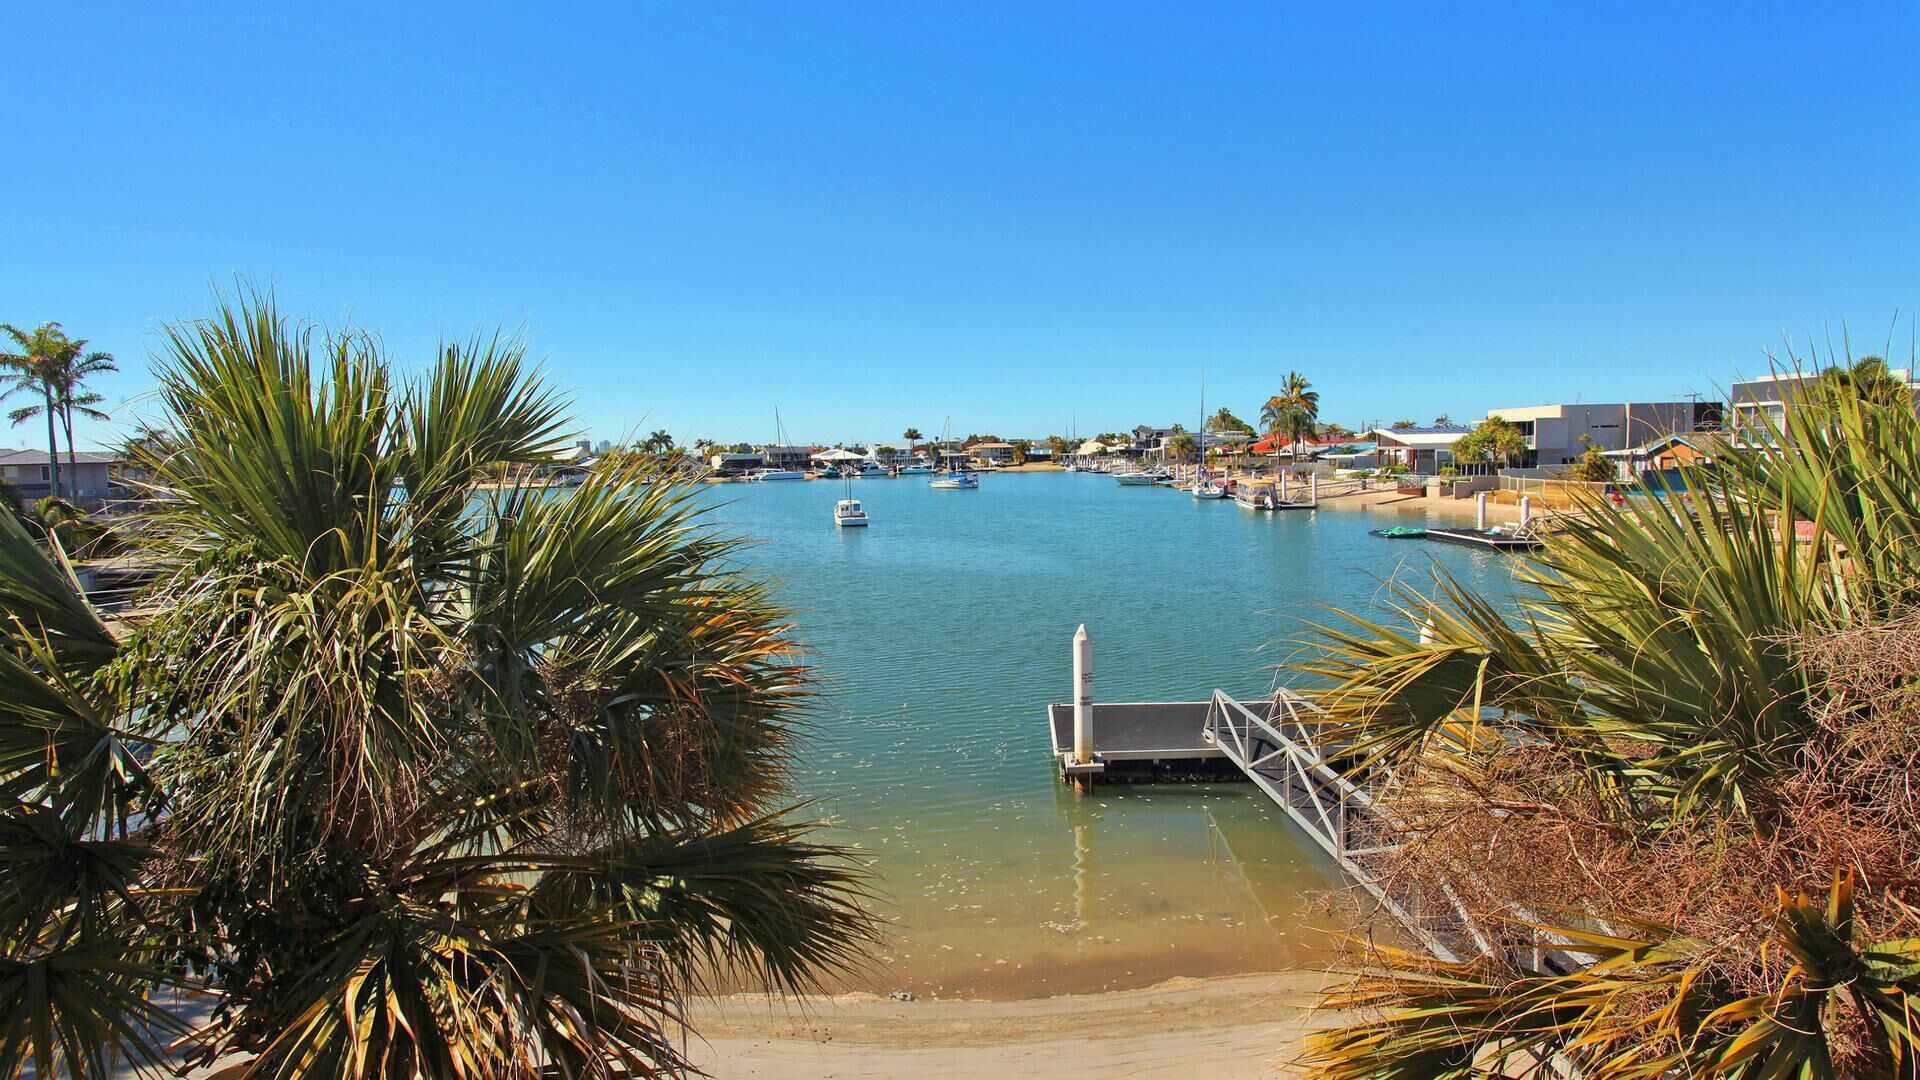 Serenity Waters 6 - 2 Bedroom + Sofa bed (sleep 5) apartment on canal in the heart of Mooloolaba